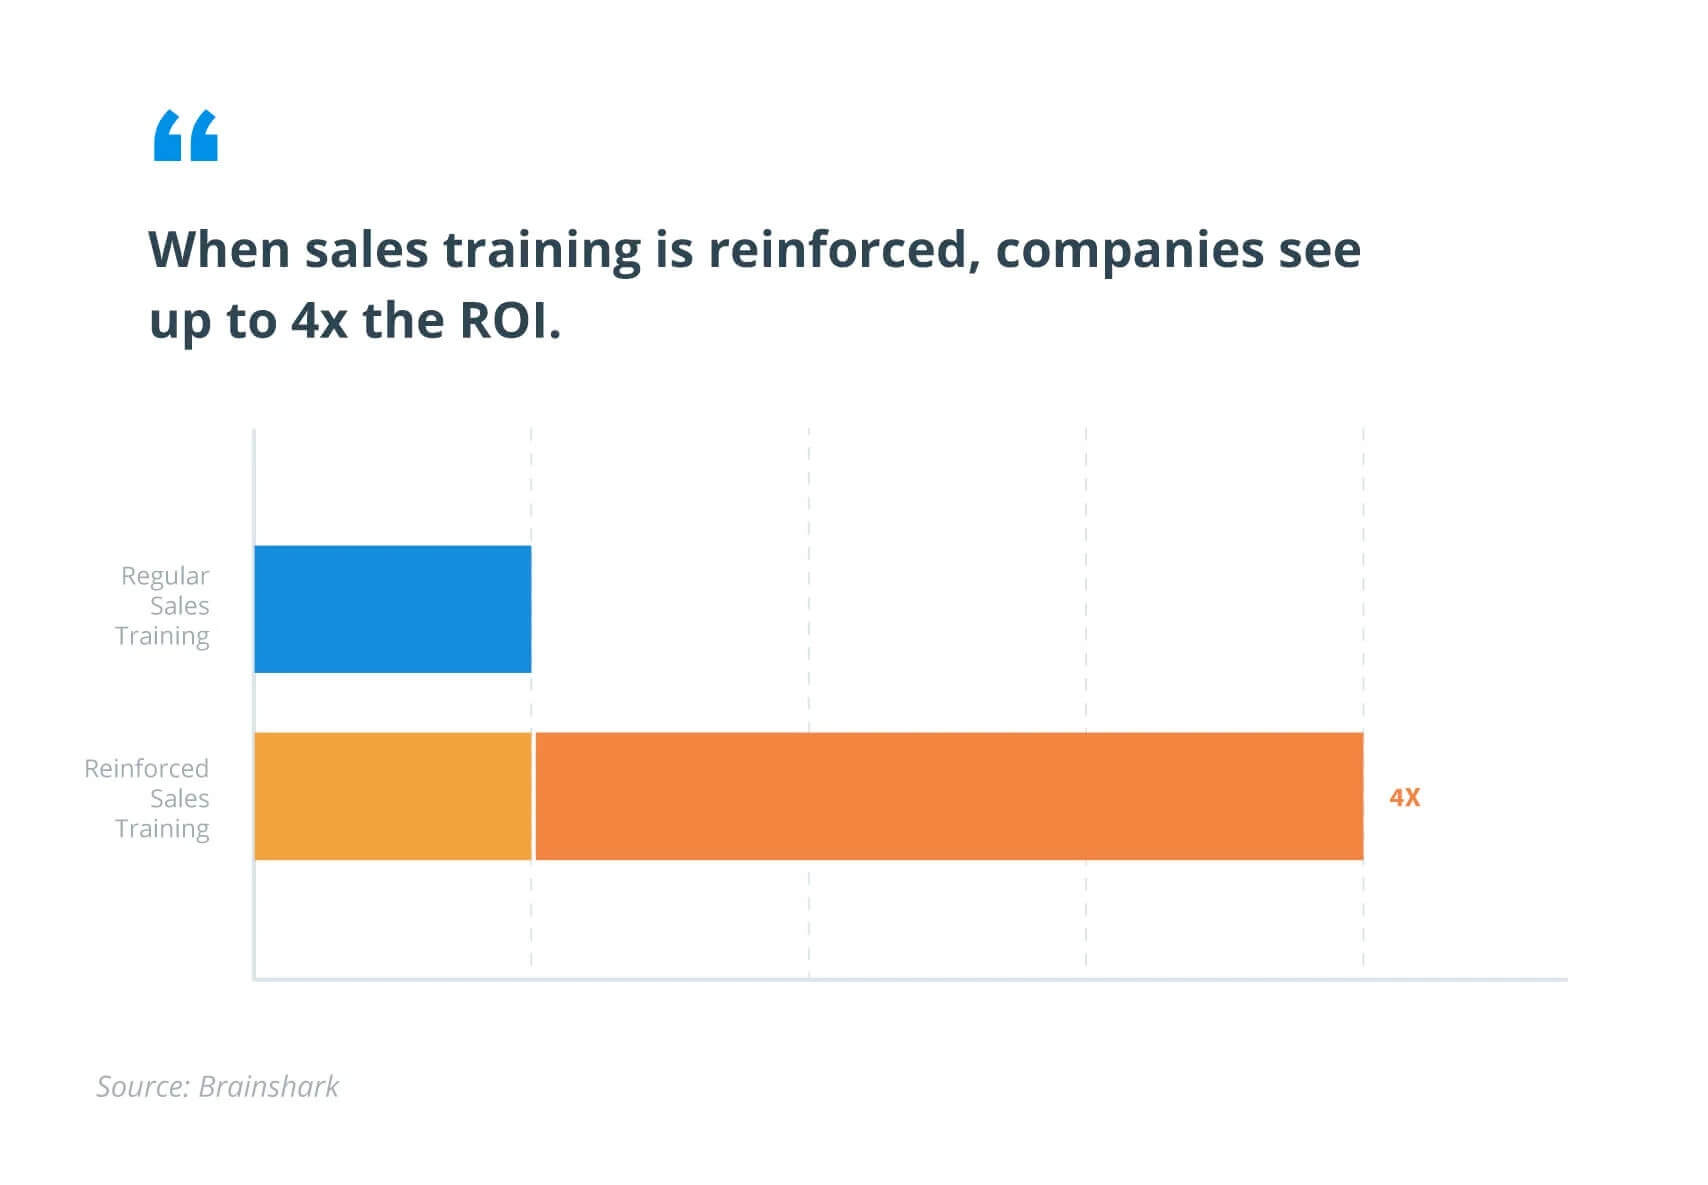 Companies see 4x ROI when reinforcing sales training